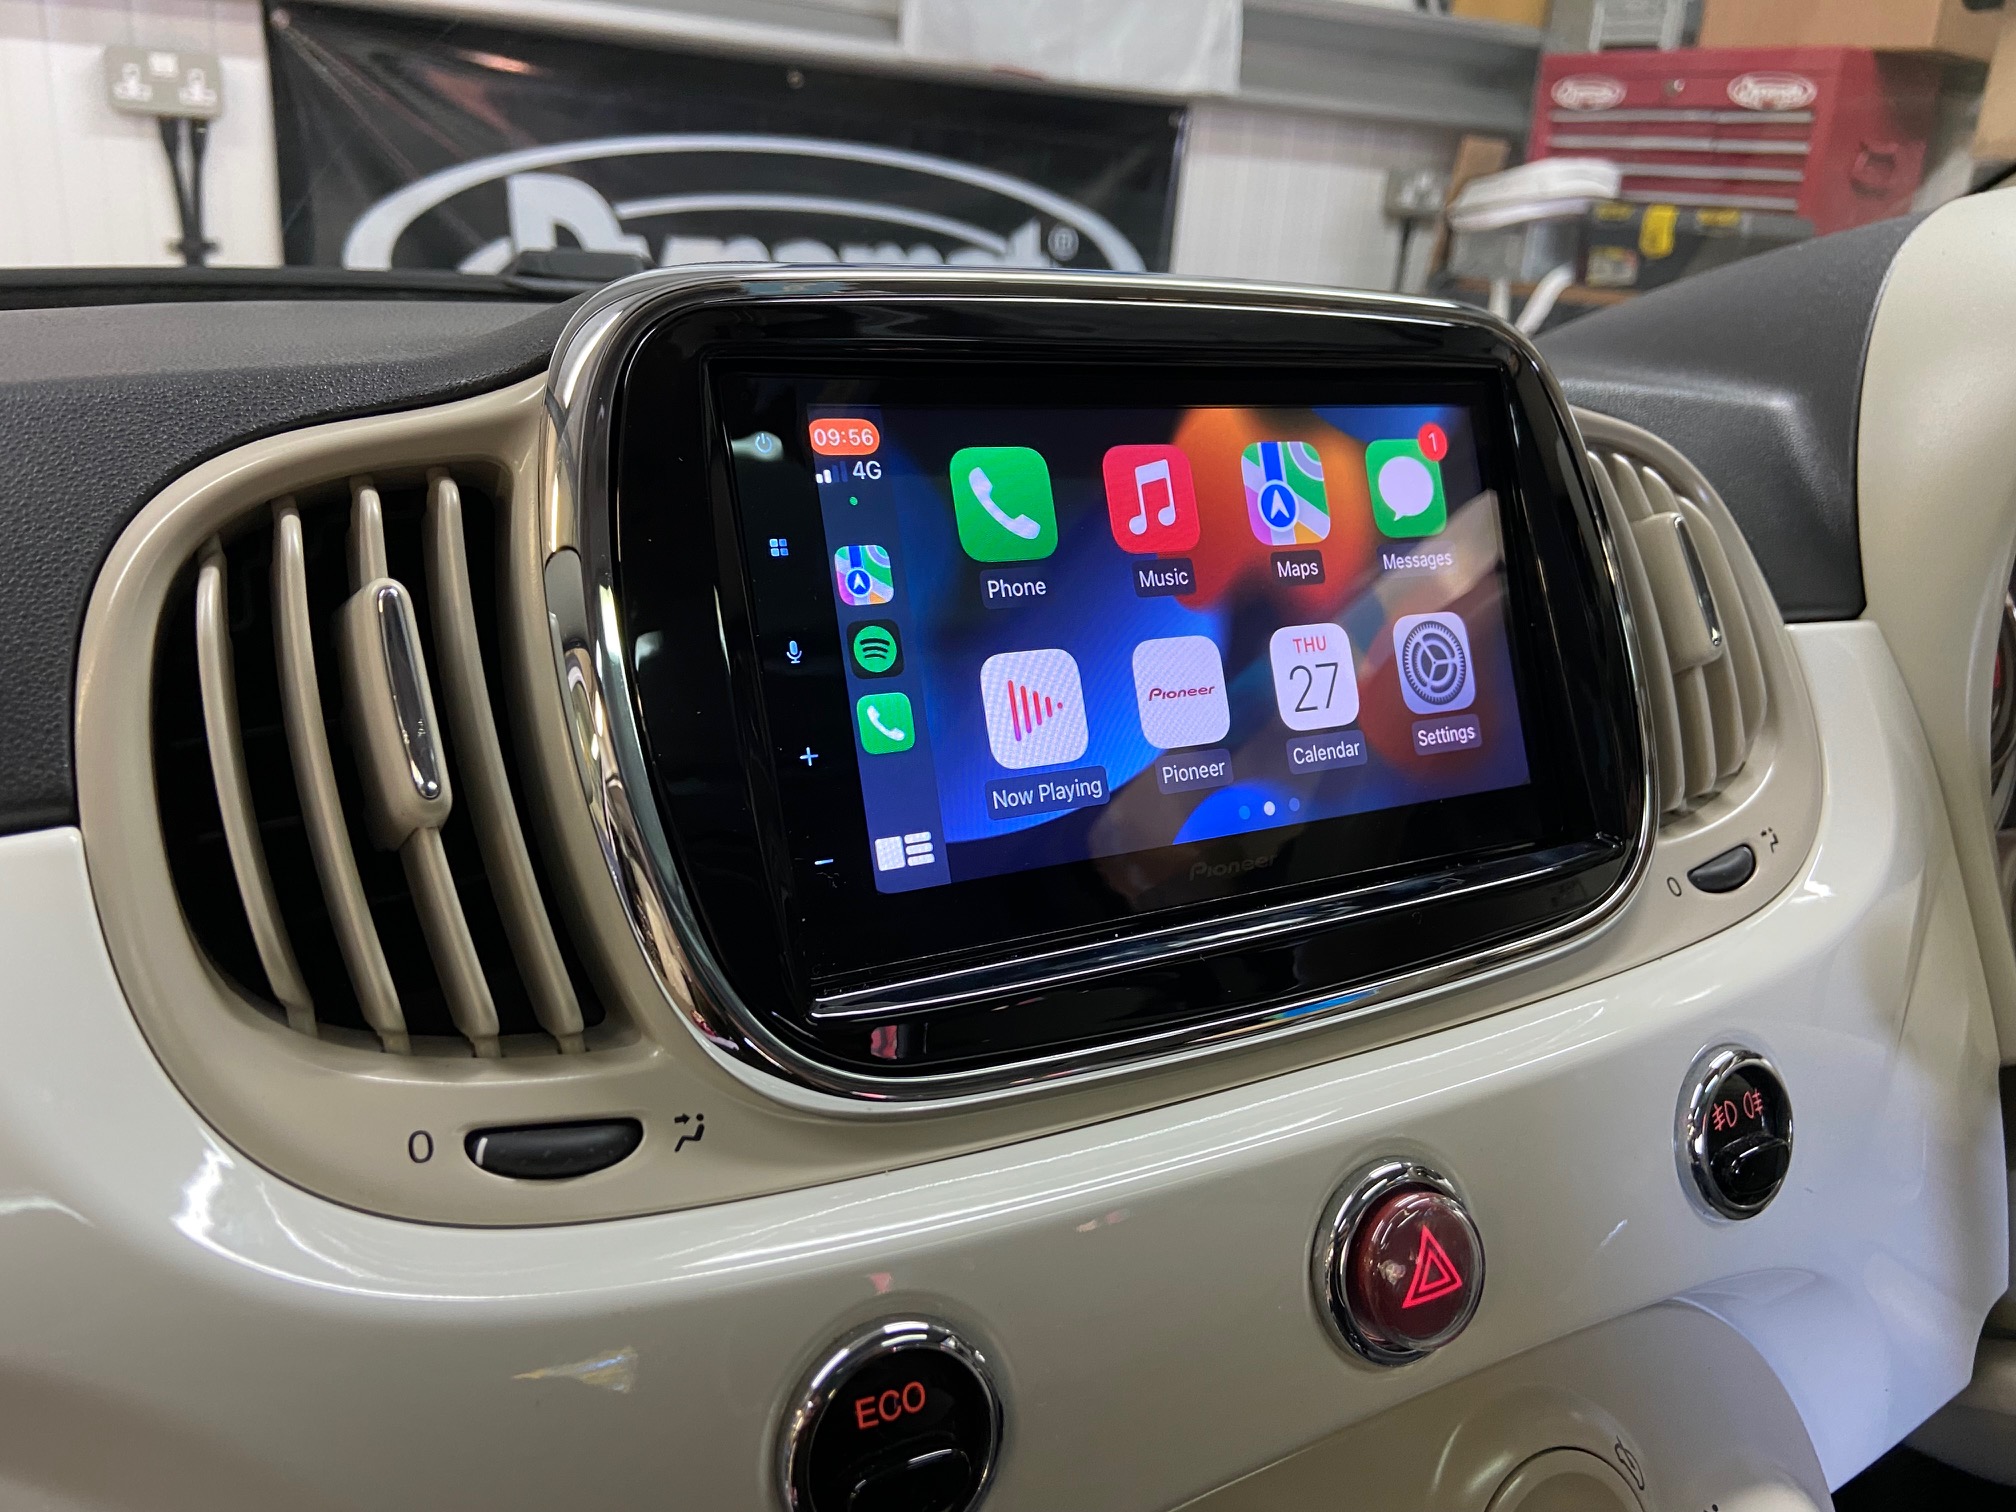 Fiat 500 2015 model Upgraded with Pioneer SPH-DA360DAB CarPlay/Android Auto  stereo – Dynamic Sounds Car Audio Installation Advice Centre